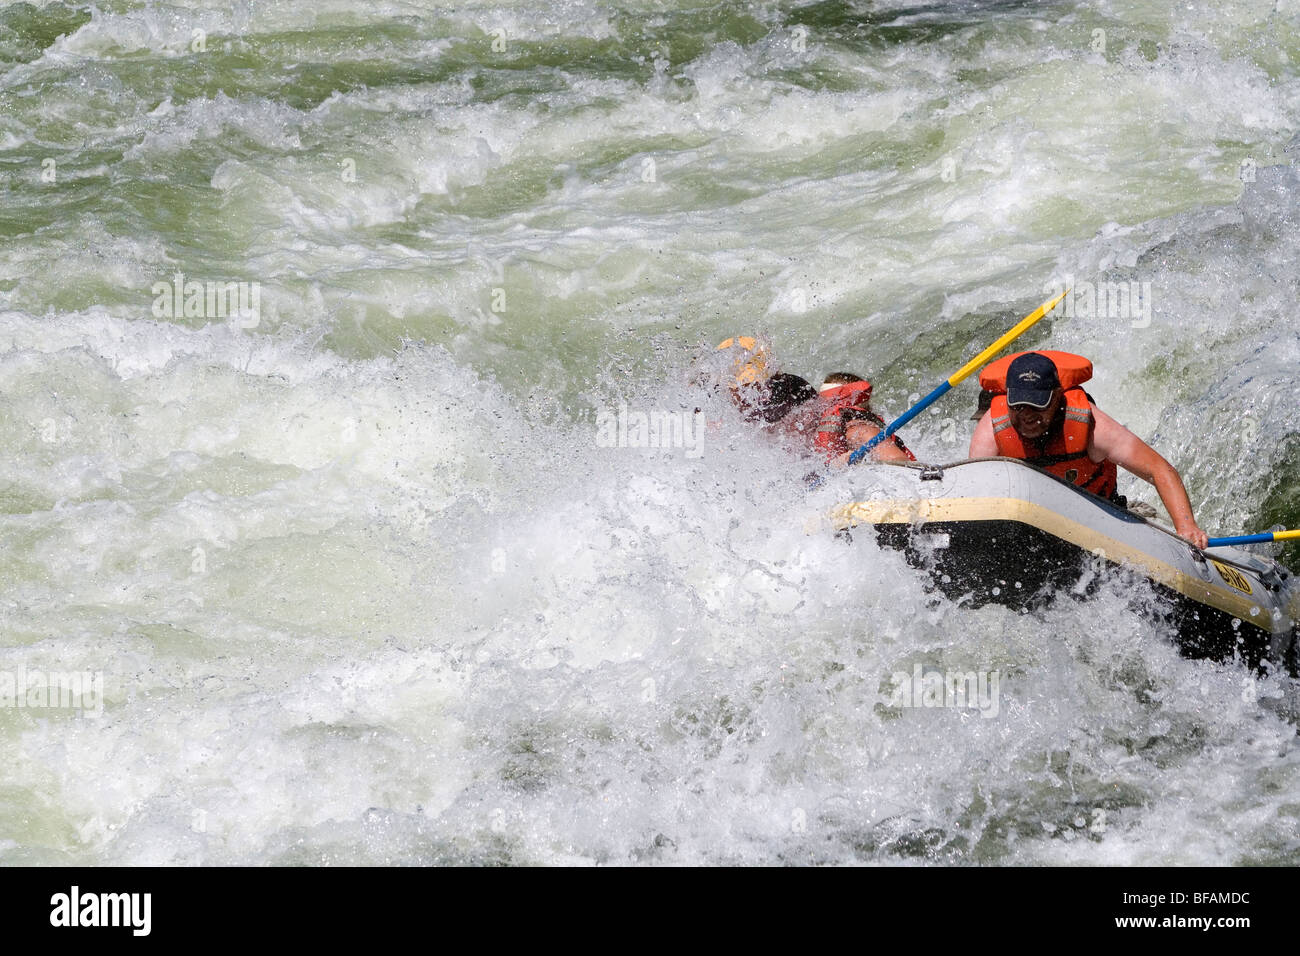 Whitewater rafting the main Payette River in southwestern Idaho, USA. Stock Photo